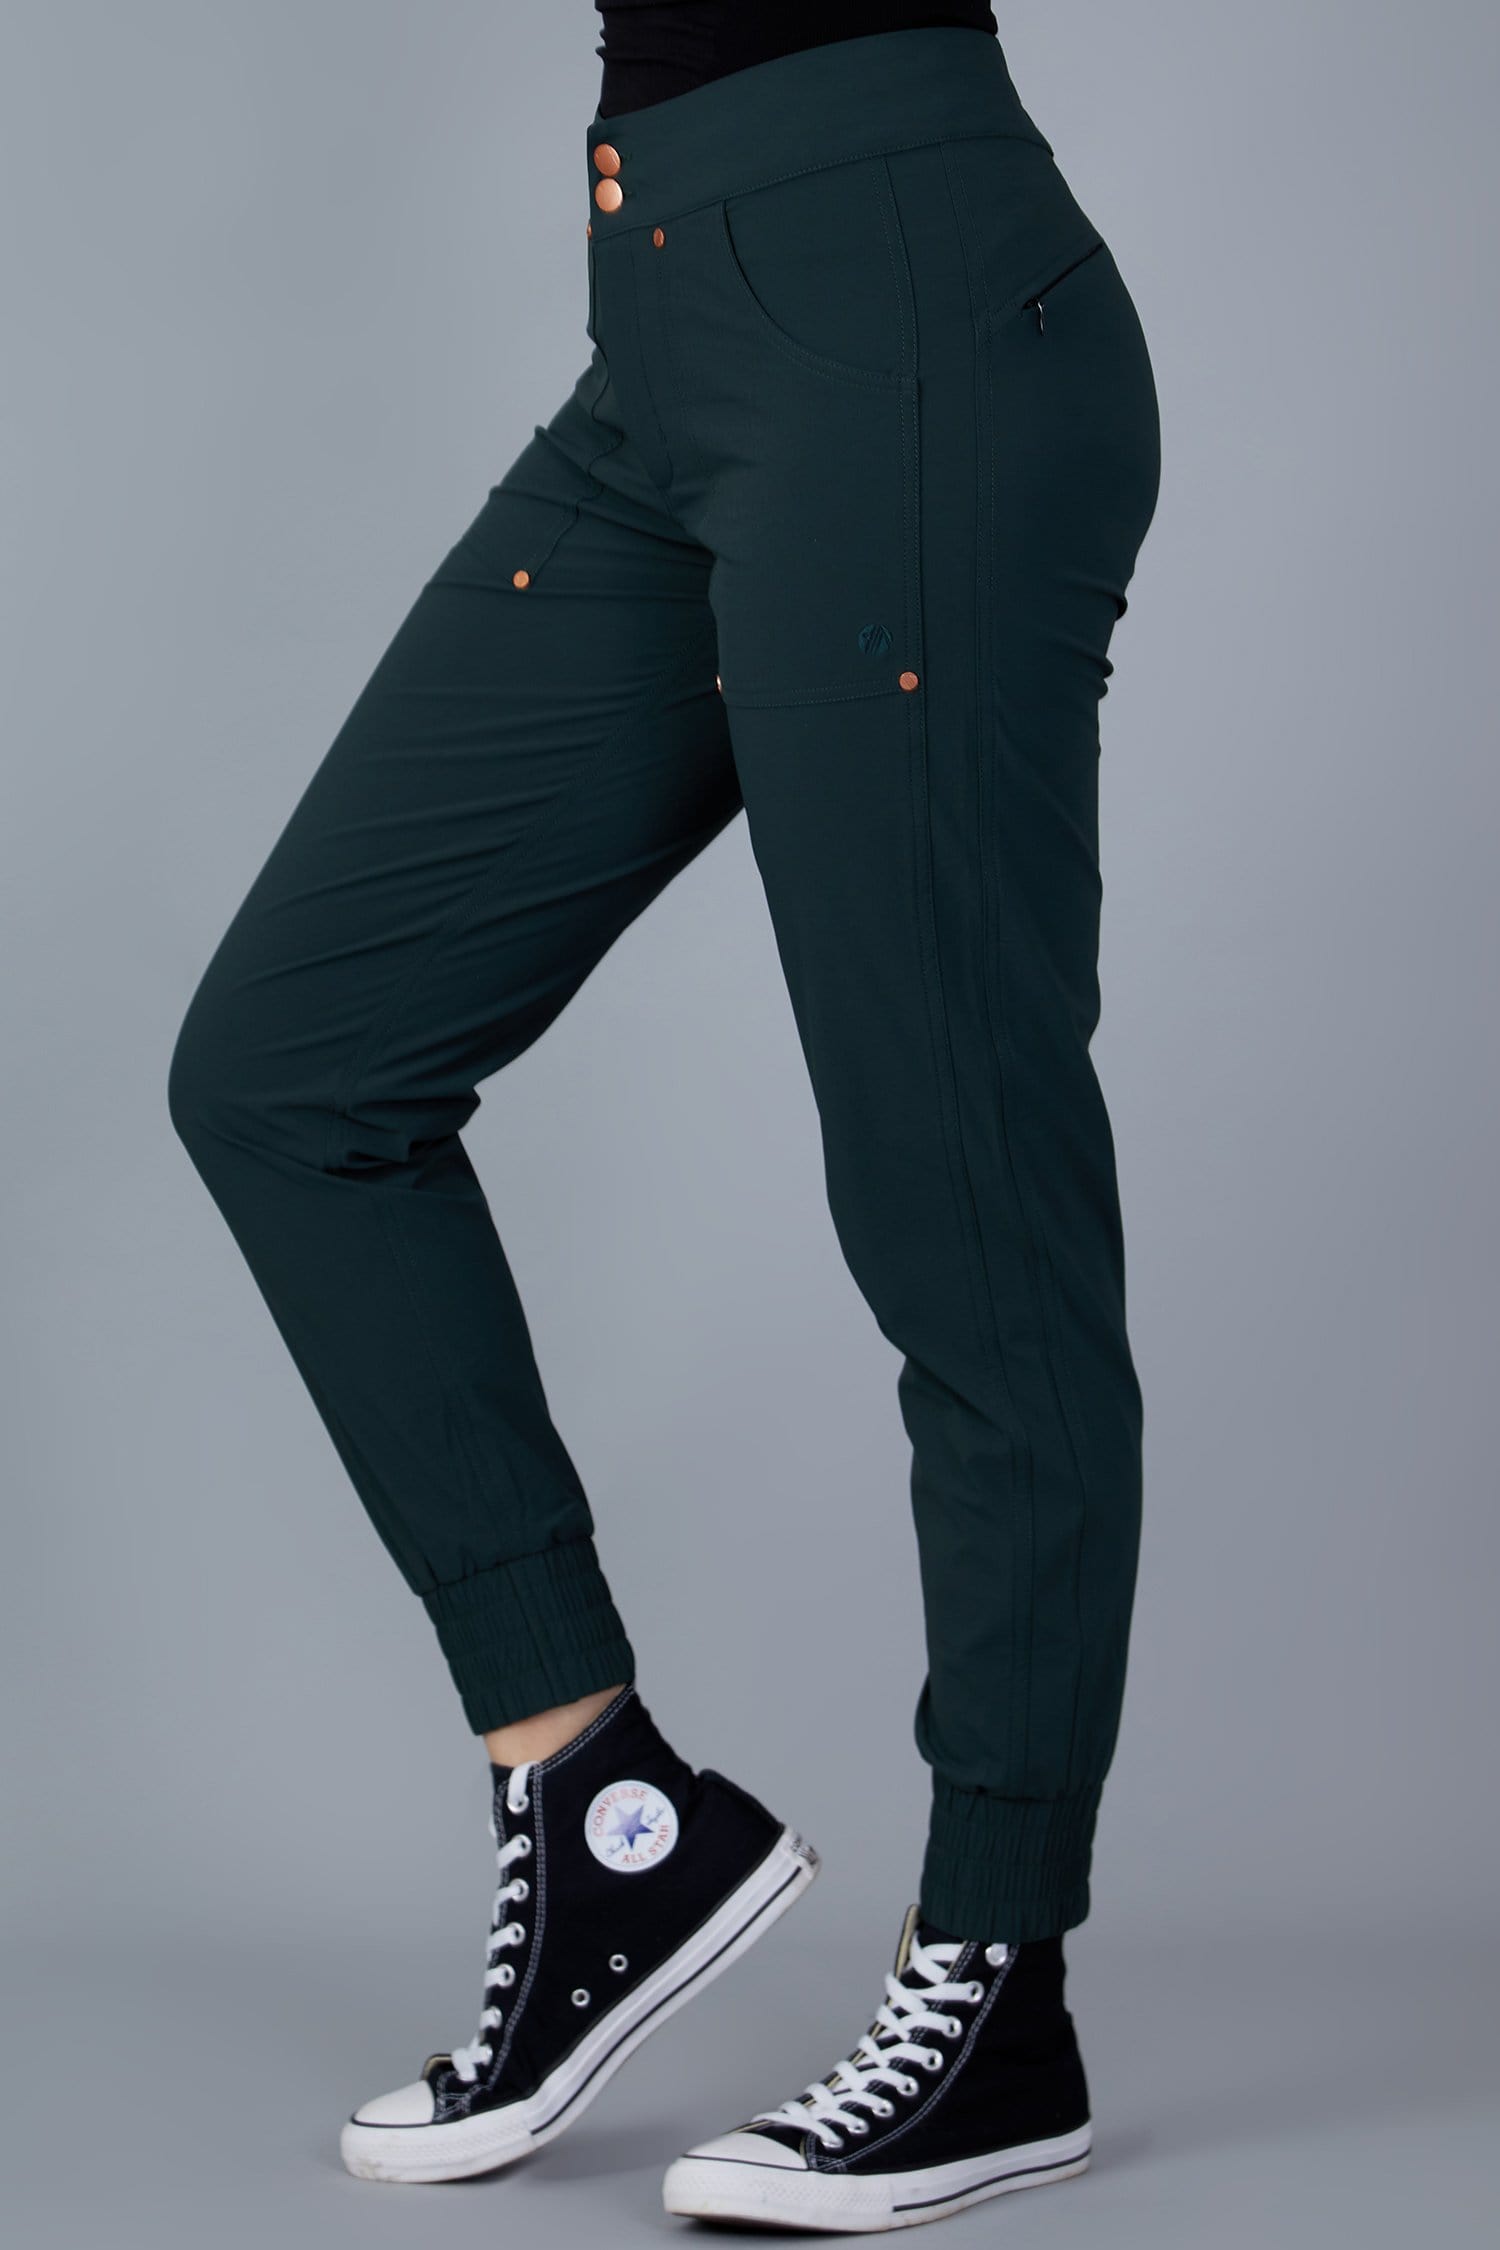 Casual Stroll Pants - Forest Green - 40r / Uk22 - Womens - Acai Outdoorwear